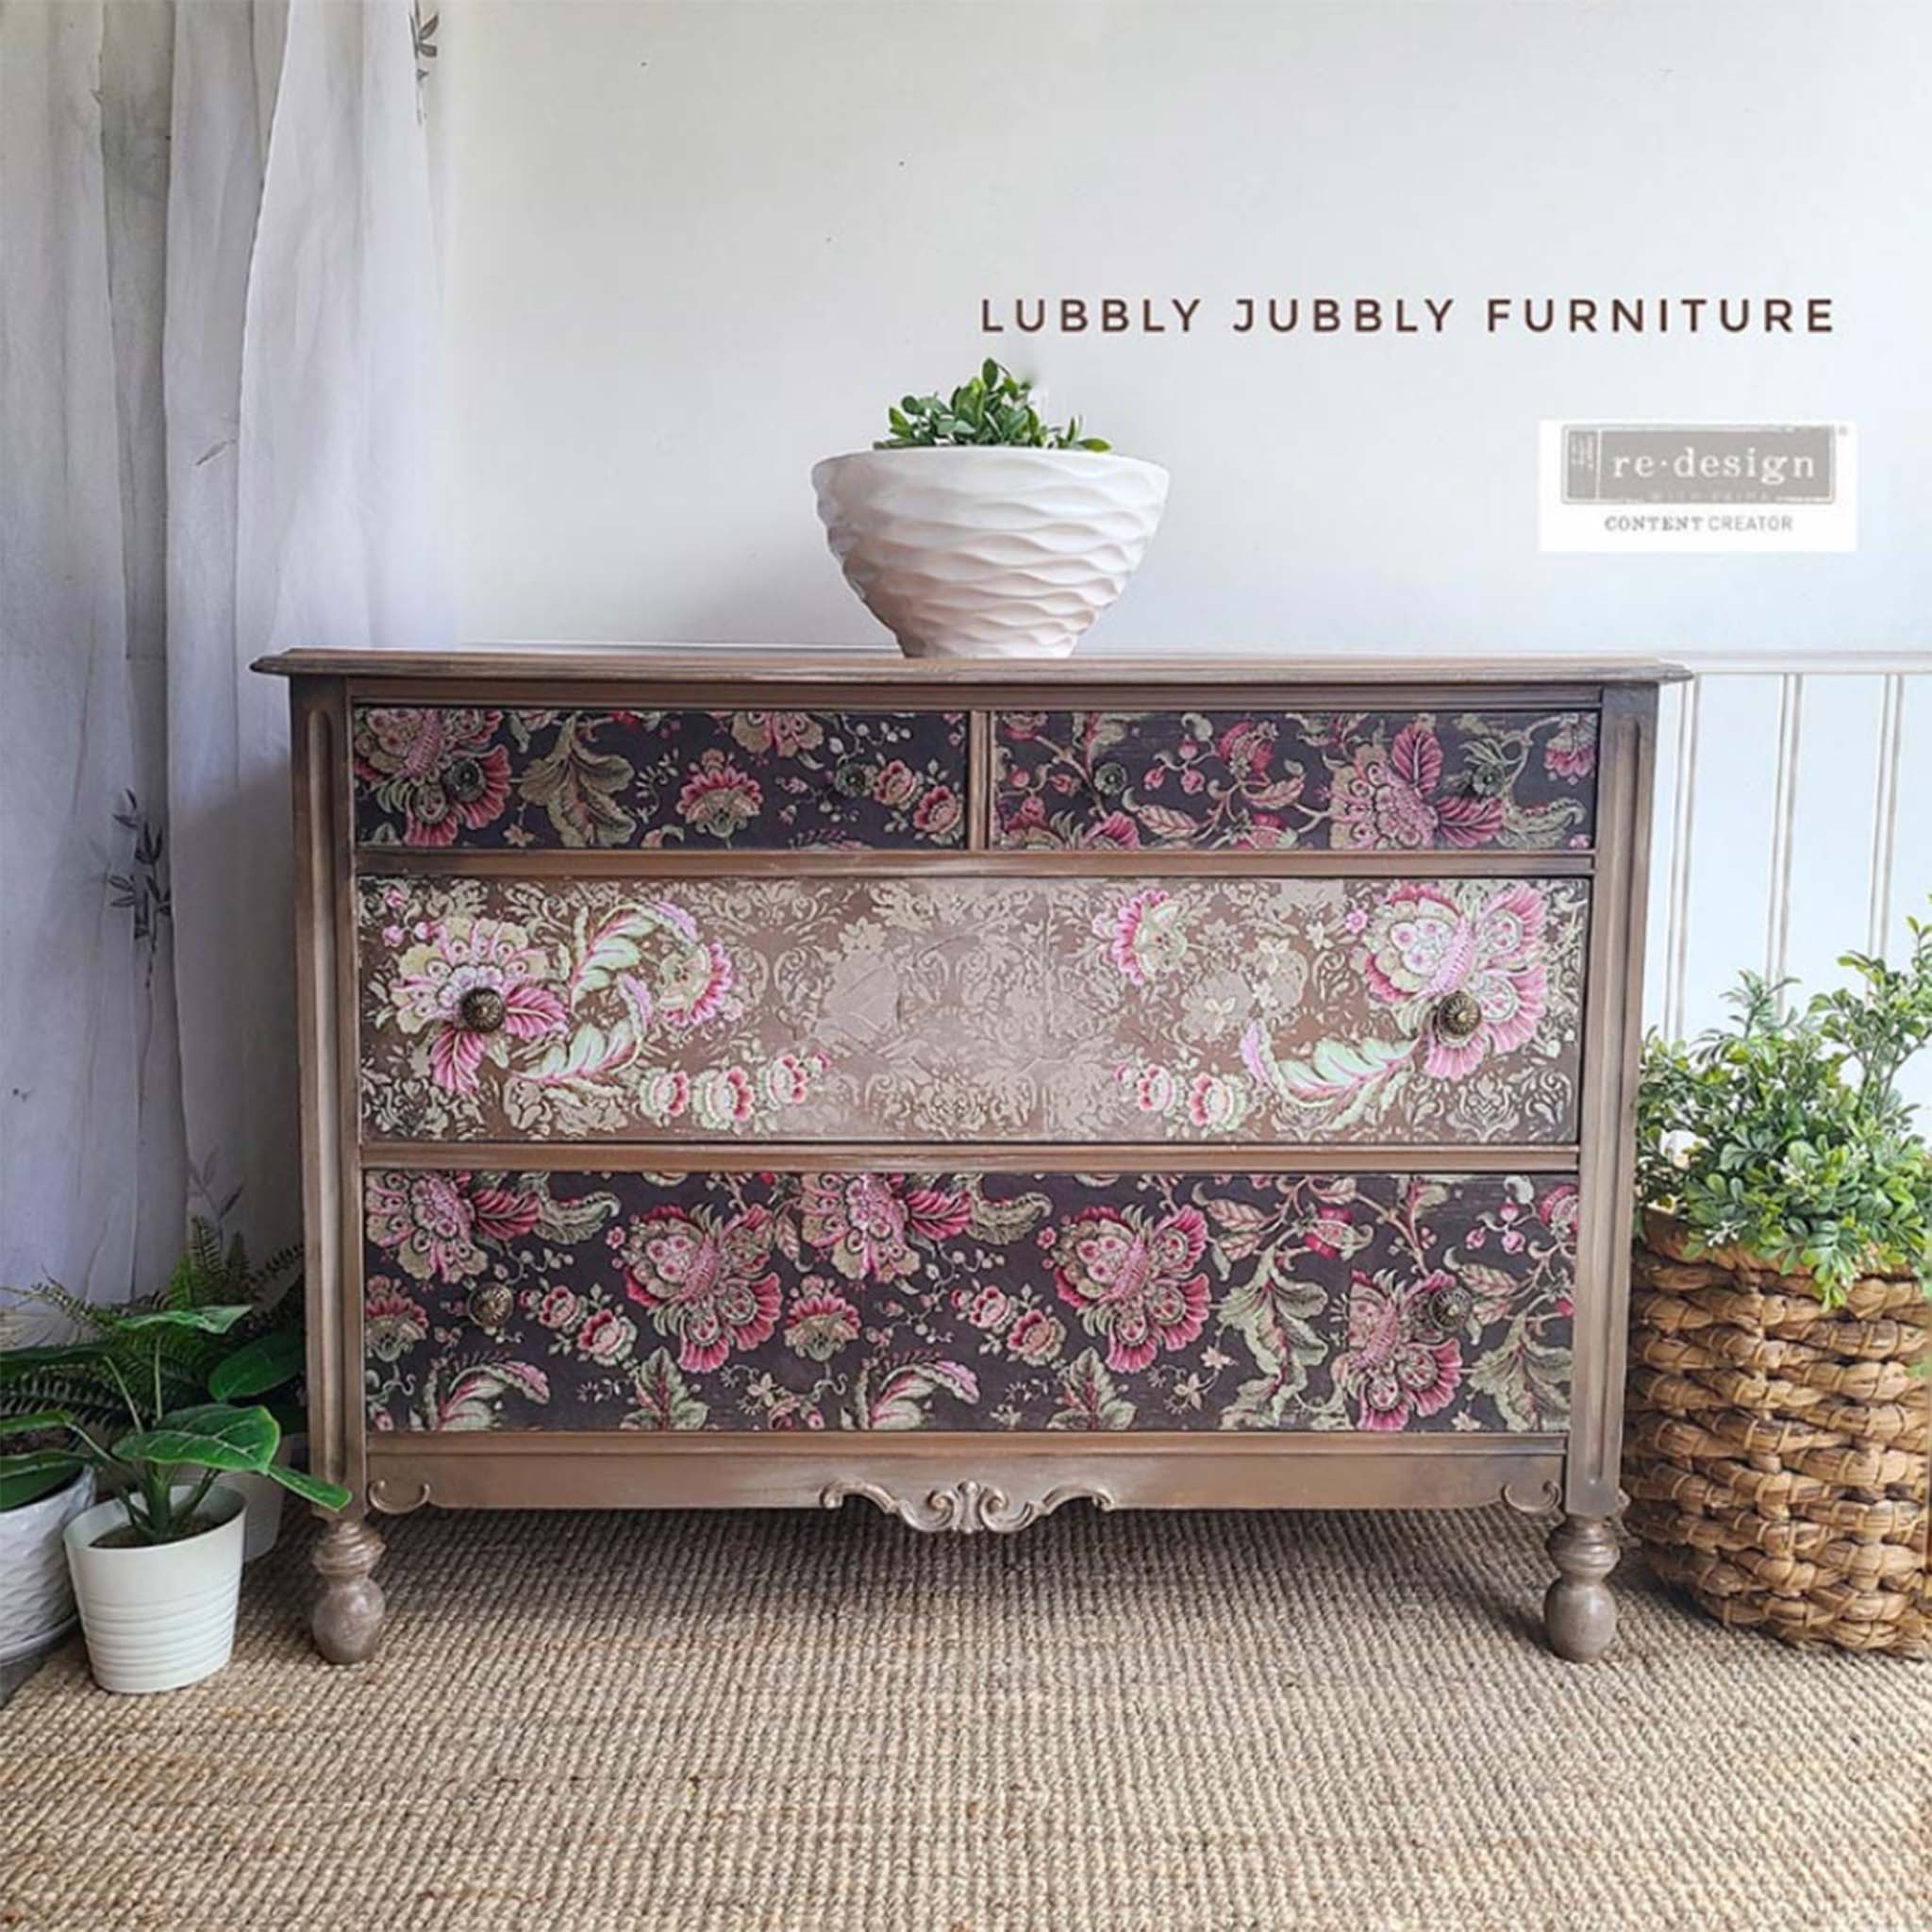 A brown 5-drawer dresser repurposed by Lubbly Jubbly Furniture, A ReDesign Ambasador, features Floral Paisley on its drawers. 